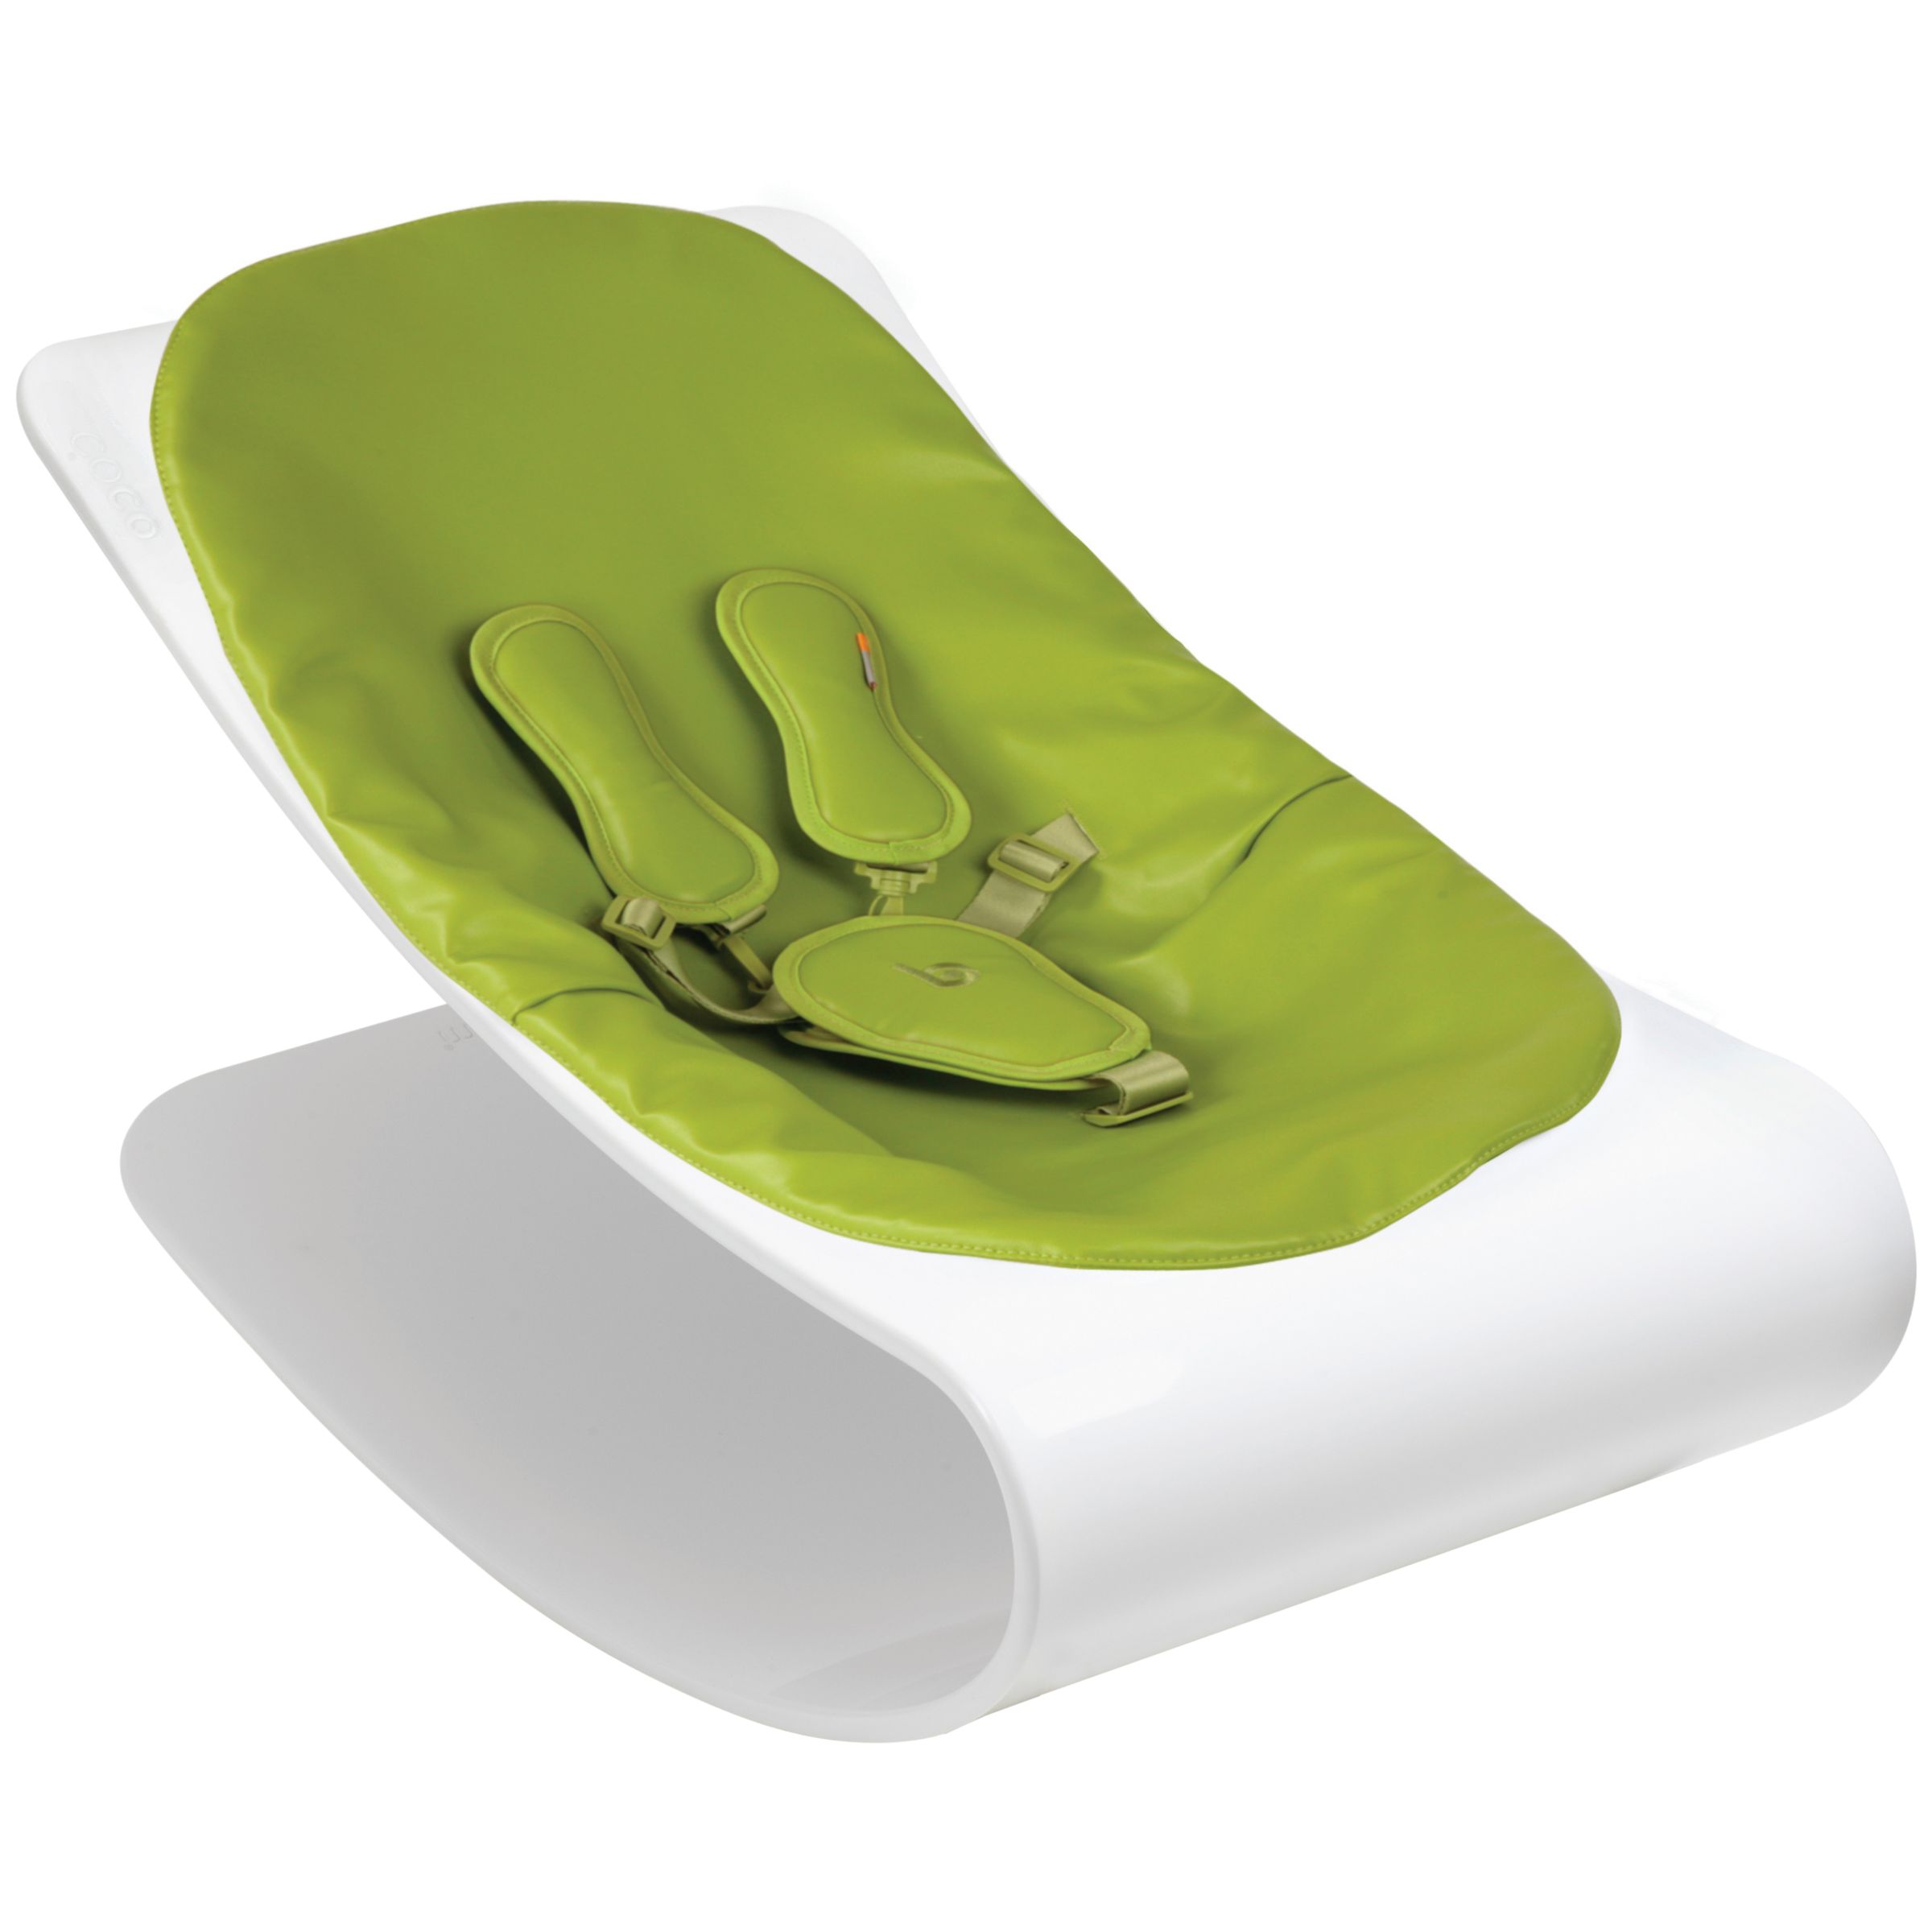 bloom Coco Plexistyle Baby Lounger, Ivory White with Gala Green at John Lewis